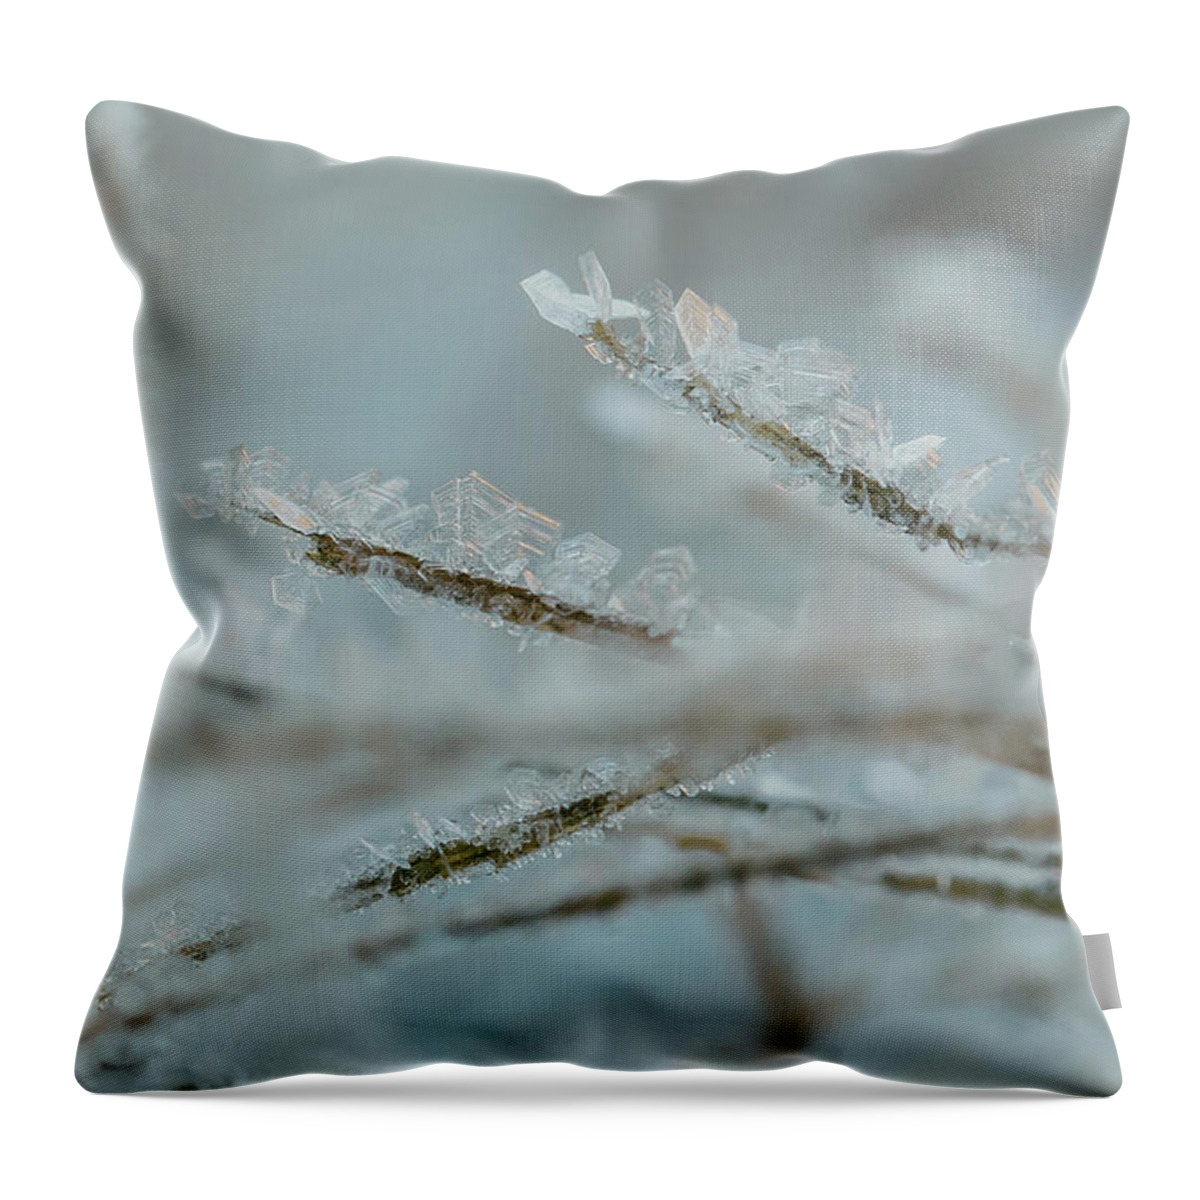 2016 Throw Pillow featuring the photograph Delicate Morning Frost by Amber Flowers